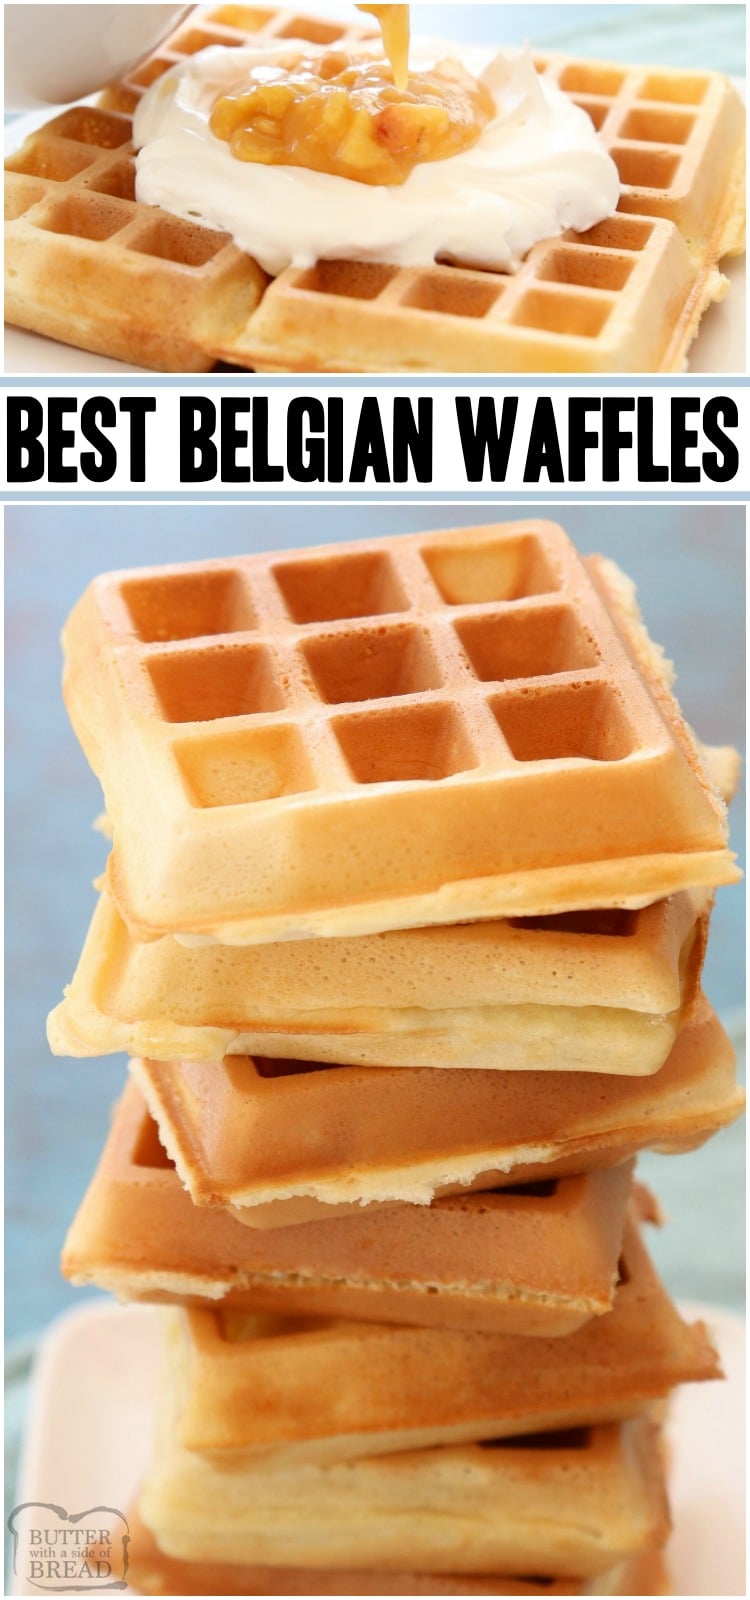 Simply the BEST Belgian Waffle recipe EVER. Crispy Belgian waffles with great flavor & deep grooves, ready for butter & syrup! #waffles #recipe #breakfast #BelgianWaffles #waffle from BUTTER WITH A SIDE OF BREAD